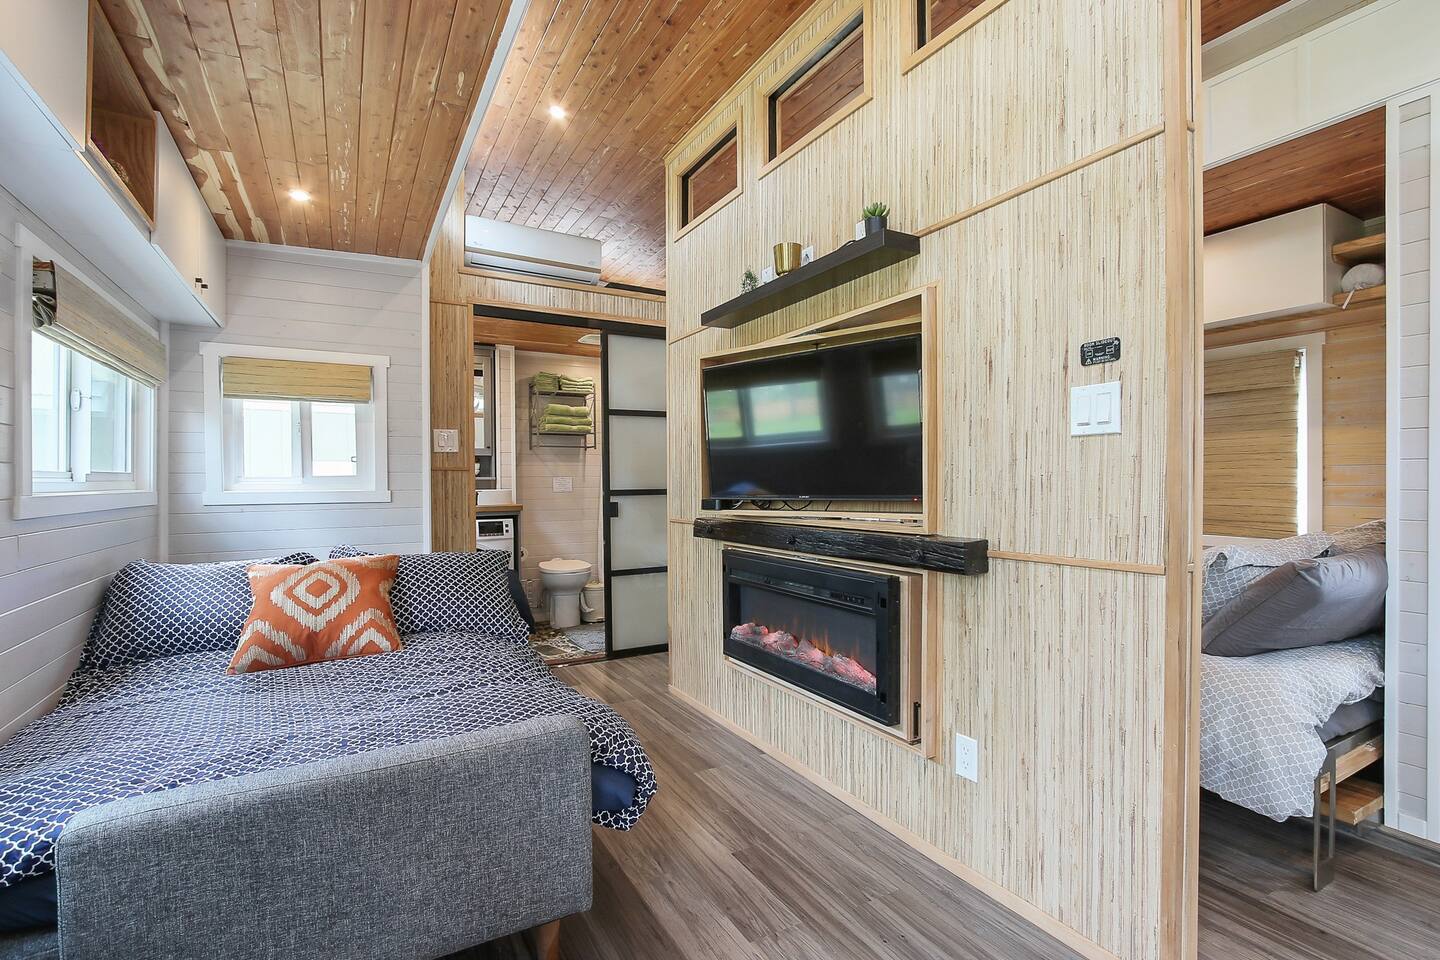 Pull out couch in living room, and  fireplace and TV on wooden wall near bed